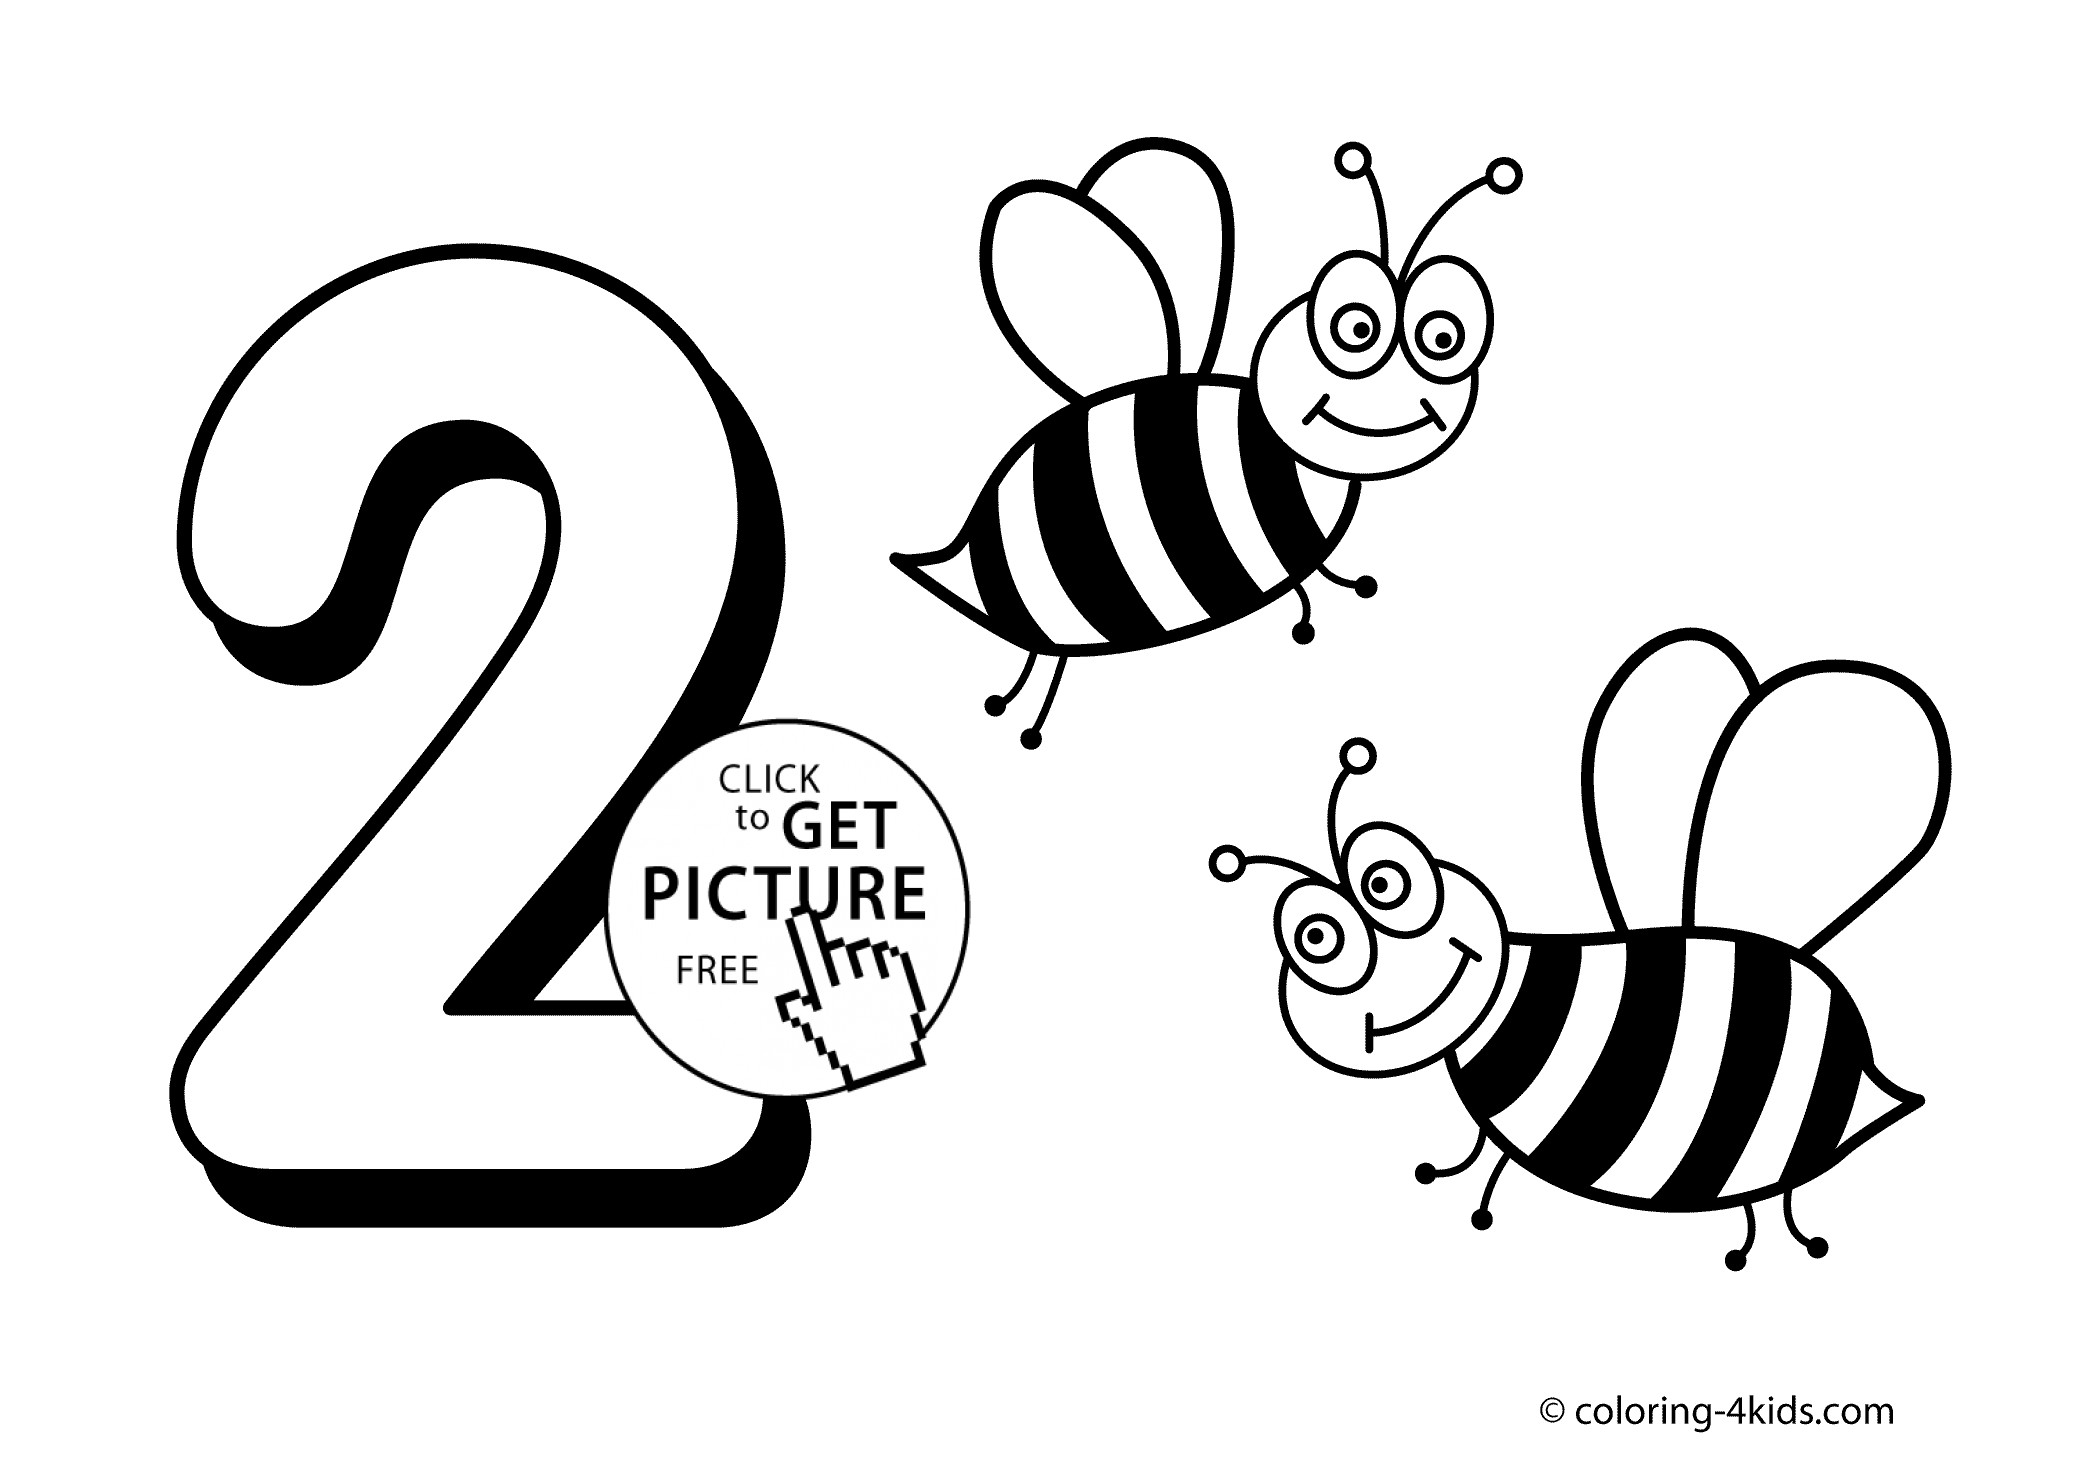 Coloring Pages For Kids Numbers
 2 numbers coloring pages for kids printable free digits